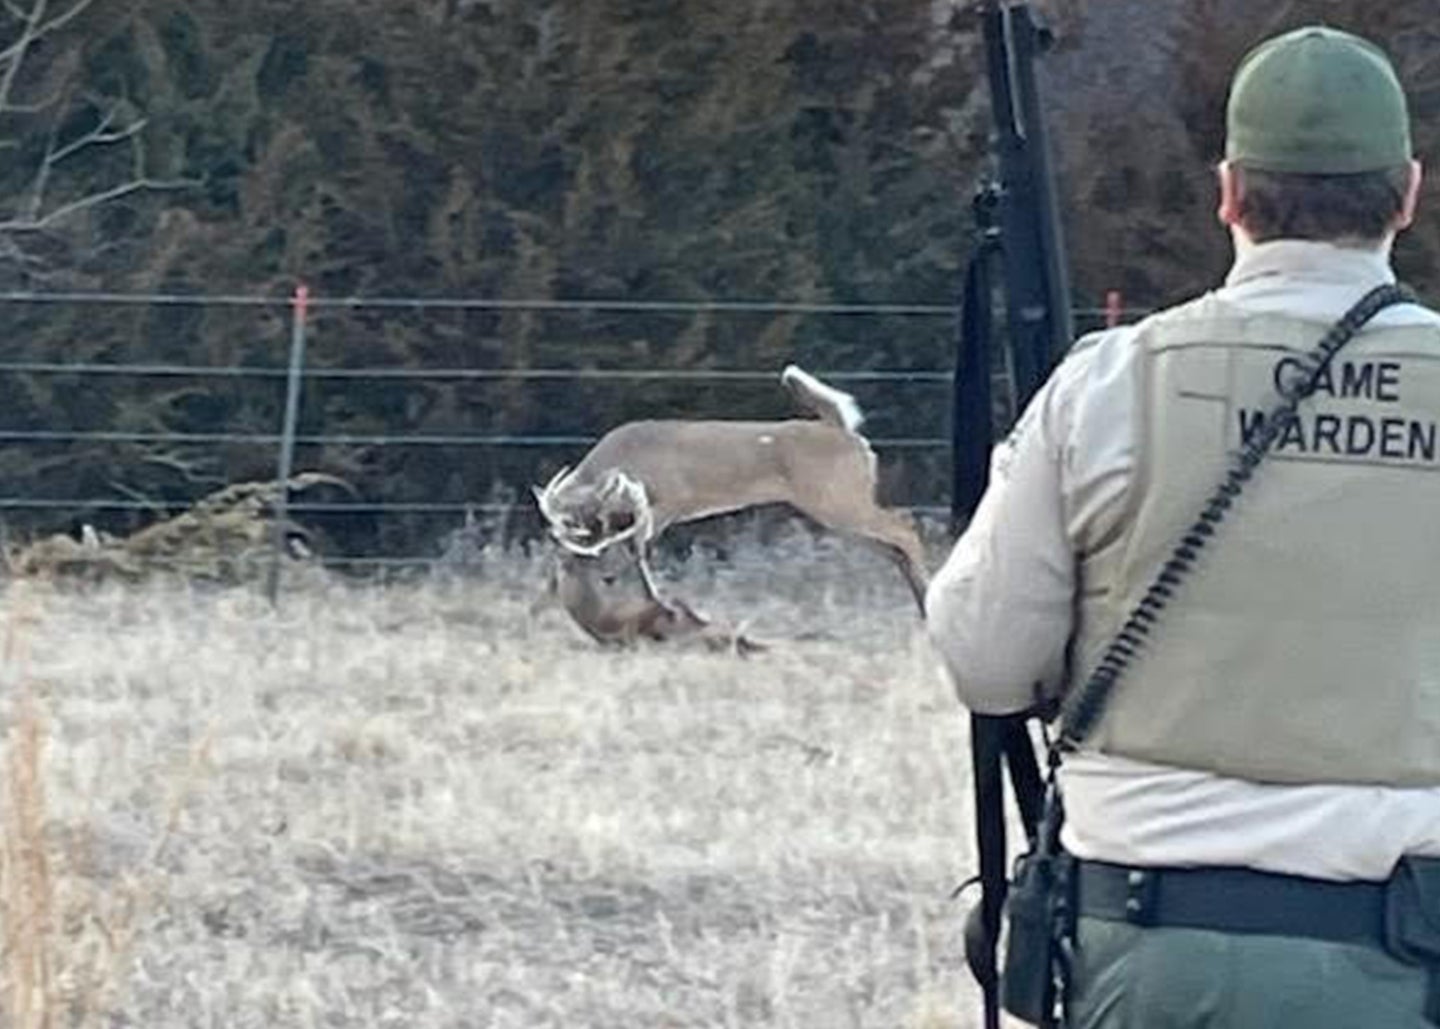 Kansas Game Warden rescues trapped deer